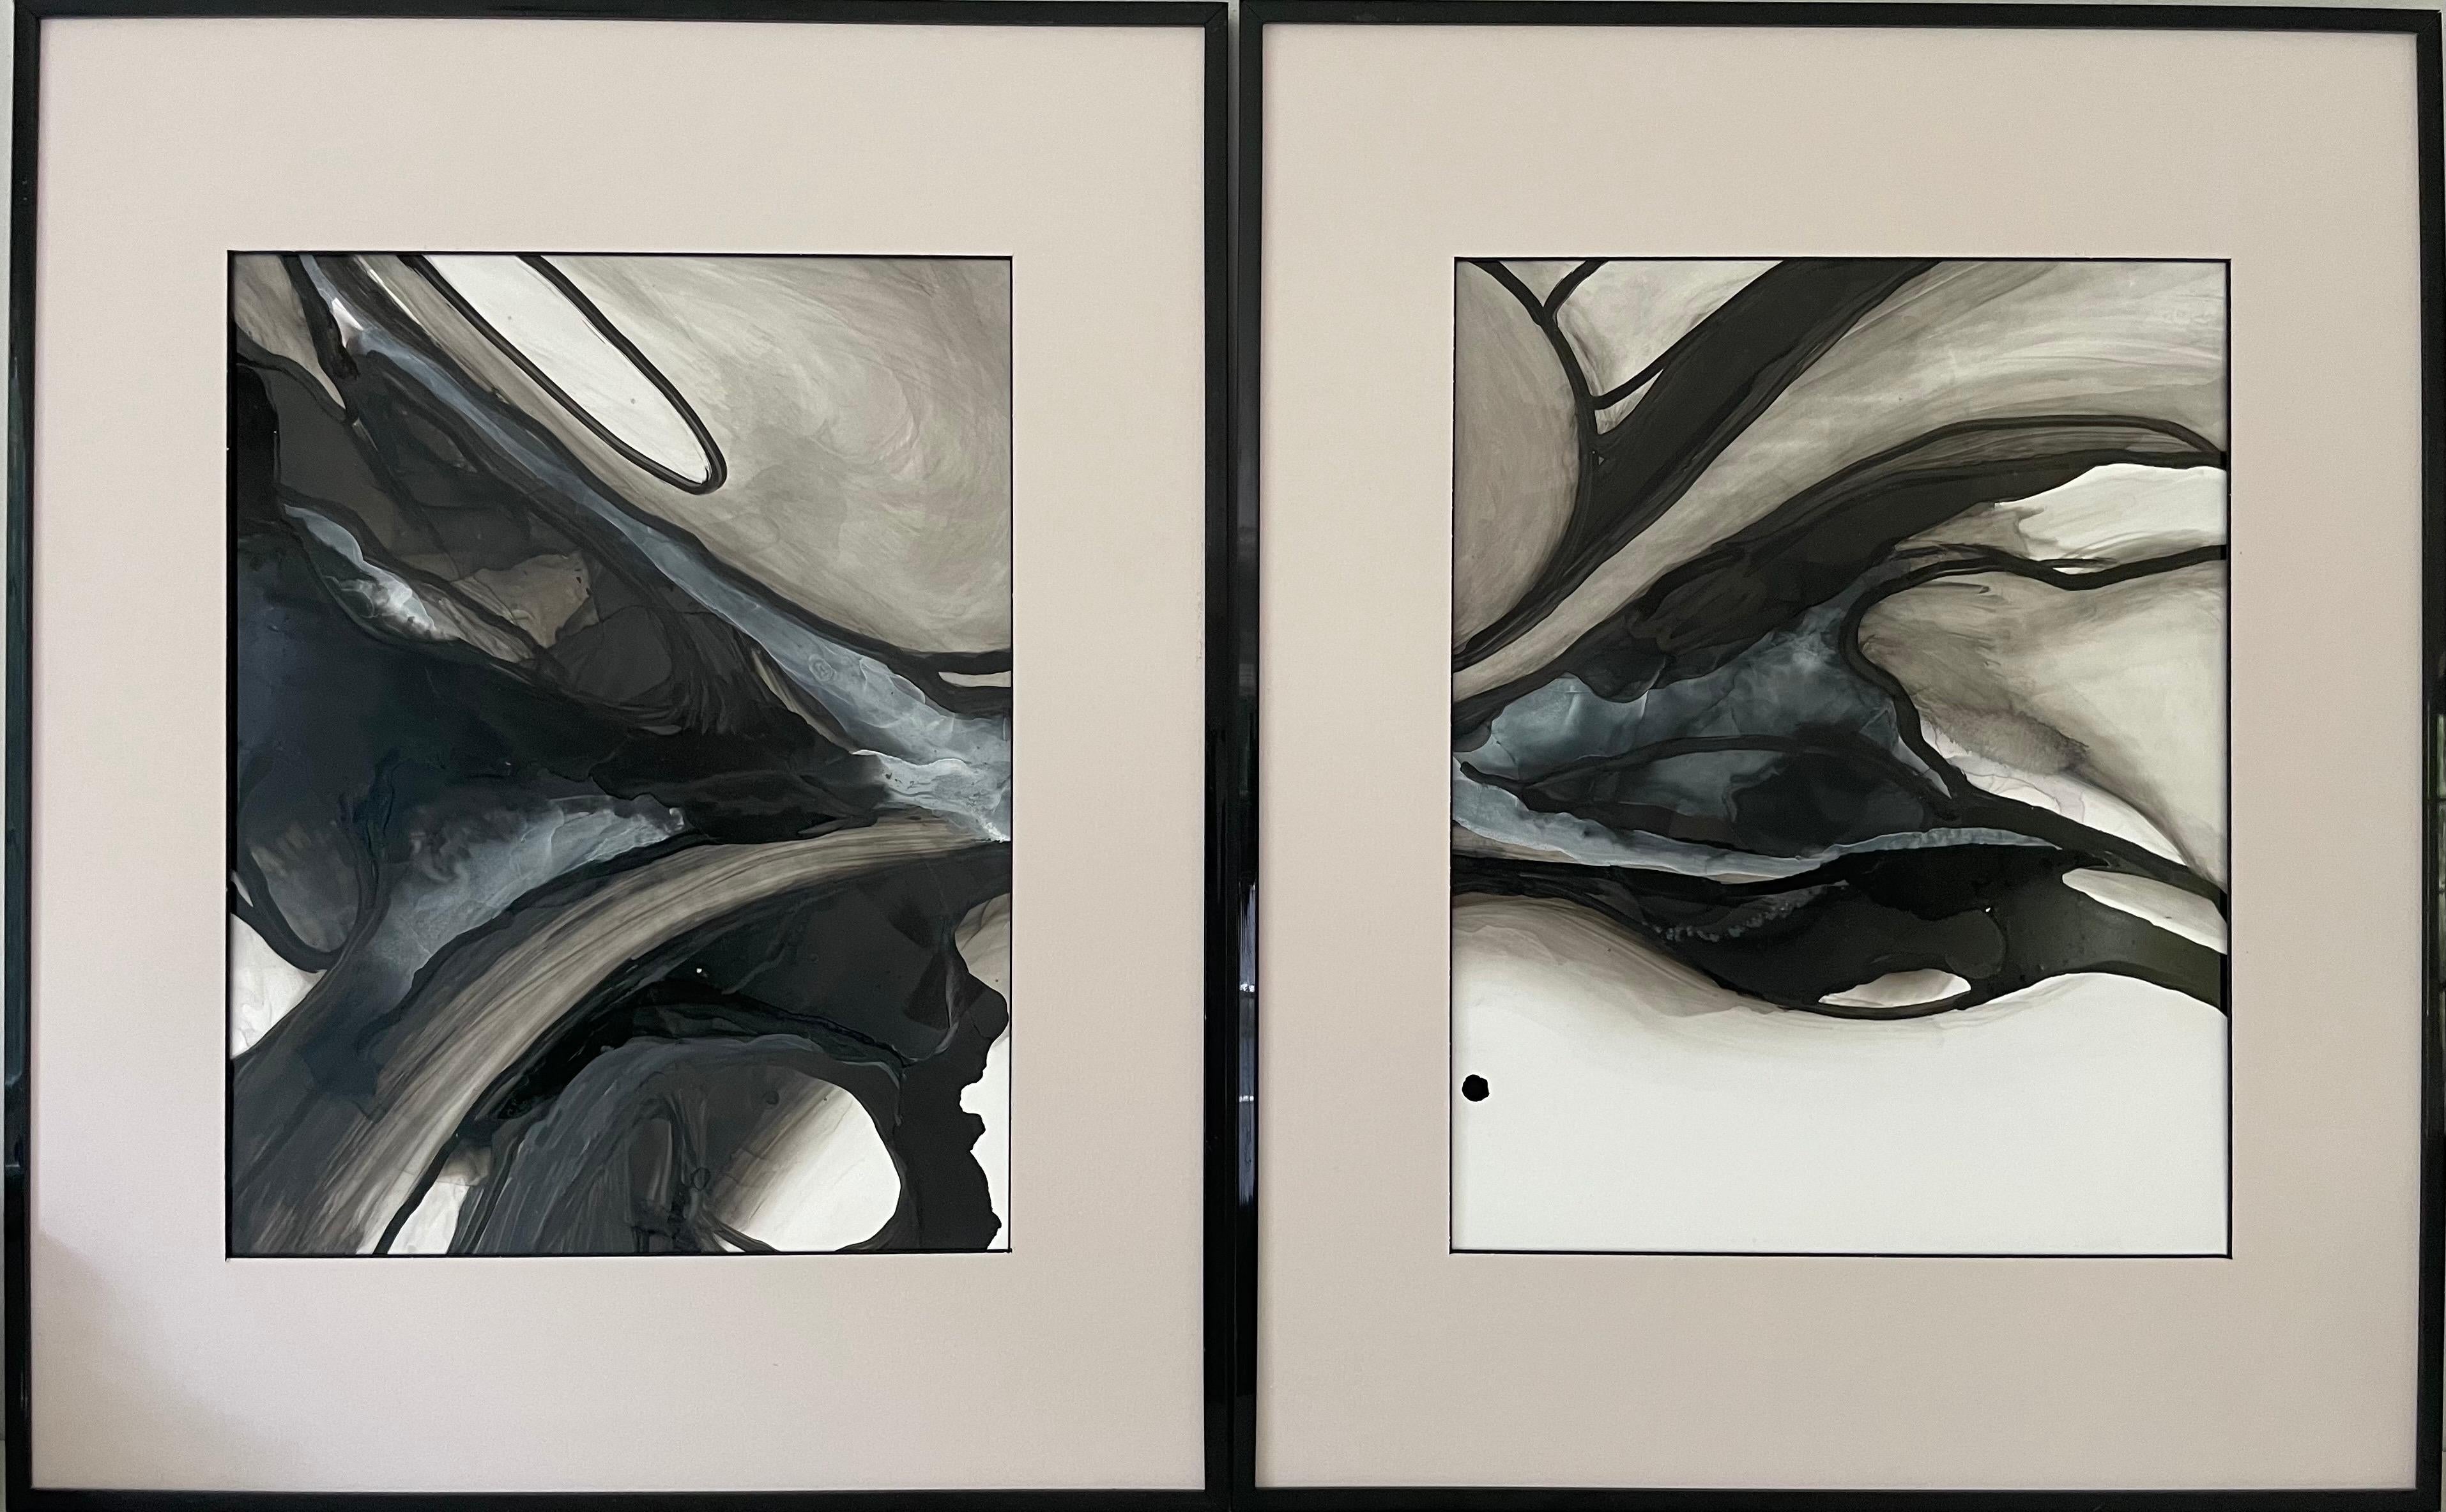 Energy of feelings - abstract painting, made in beige, black and white color